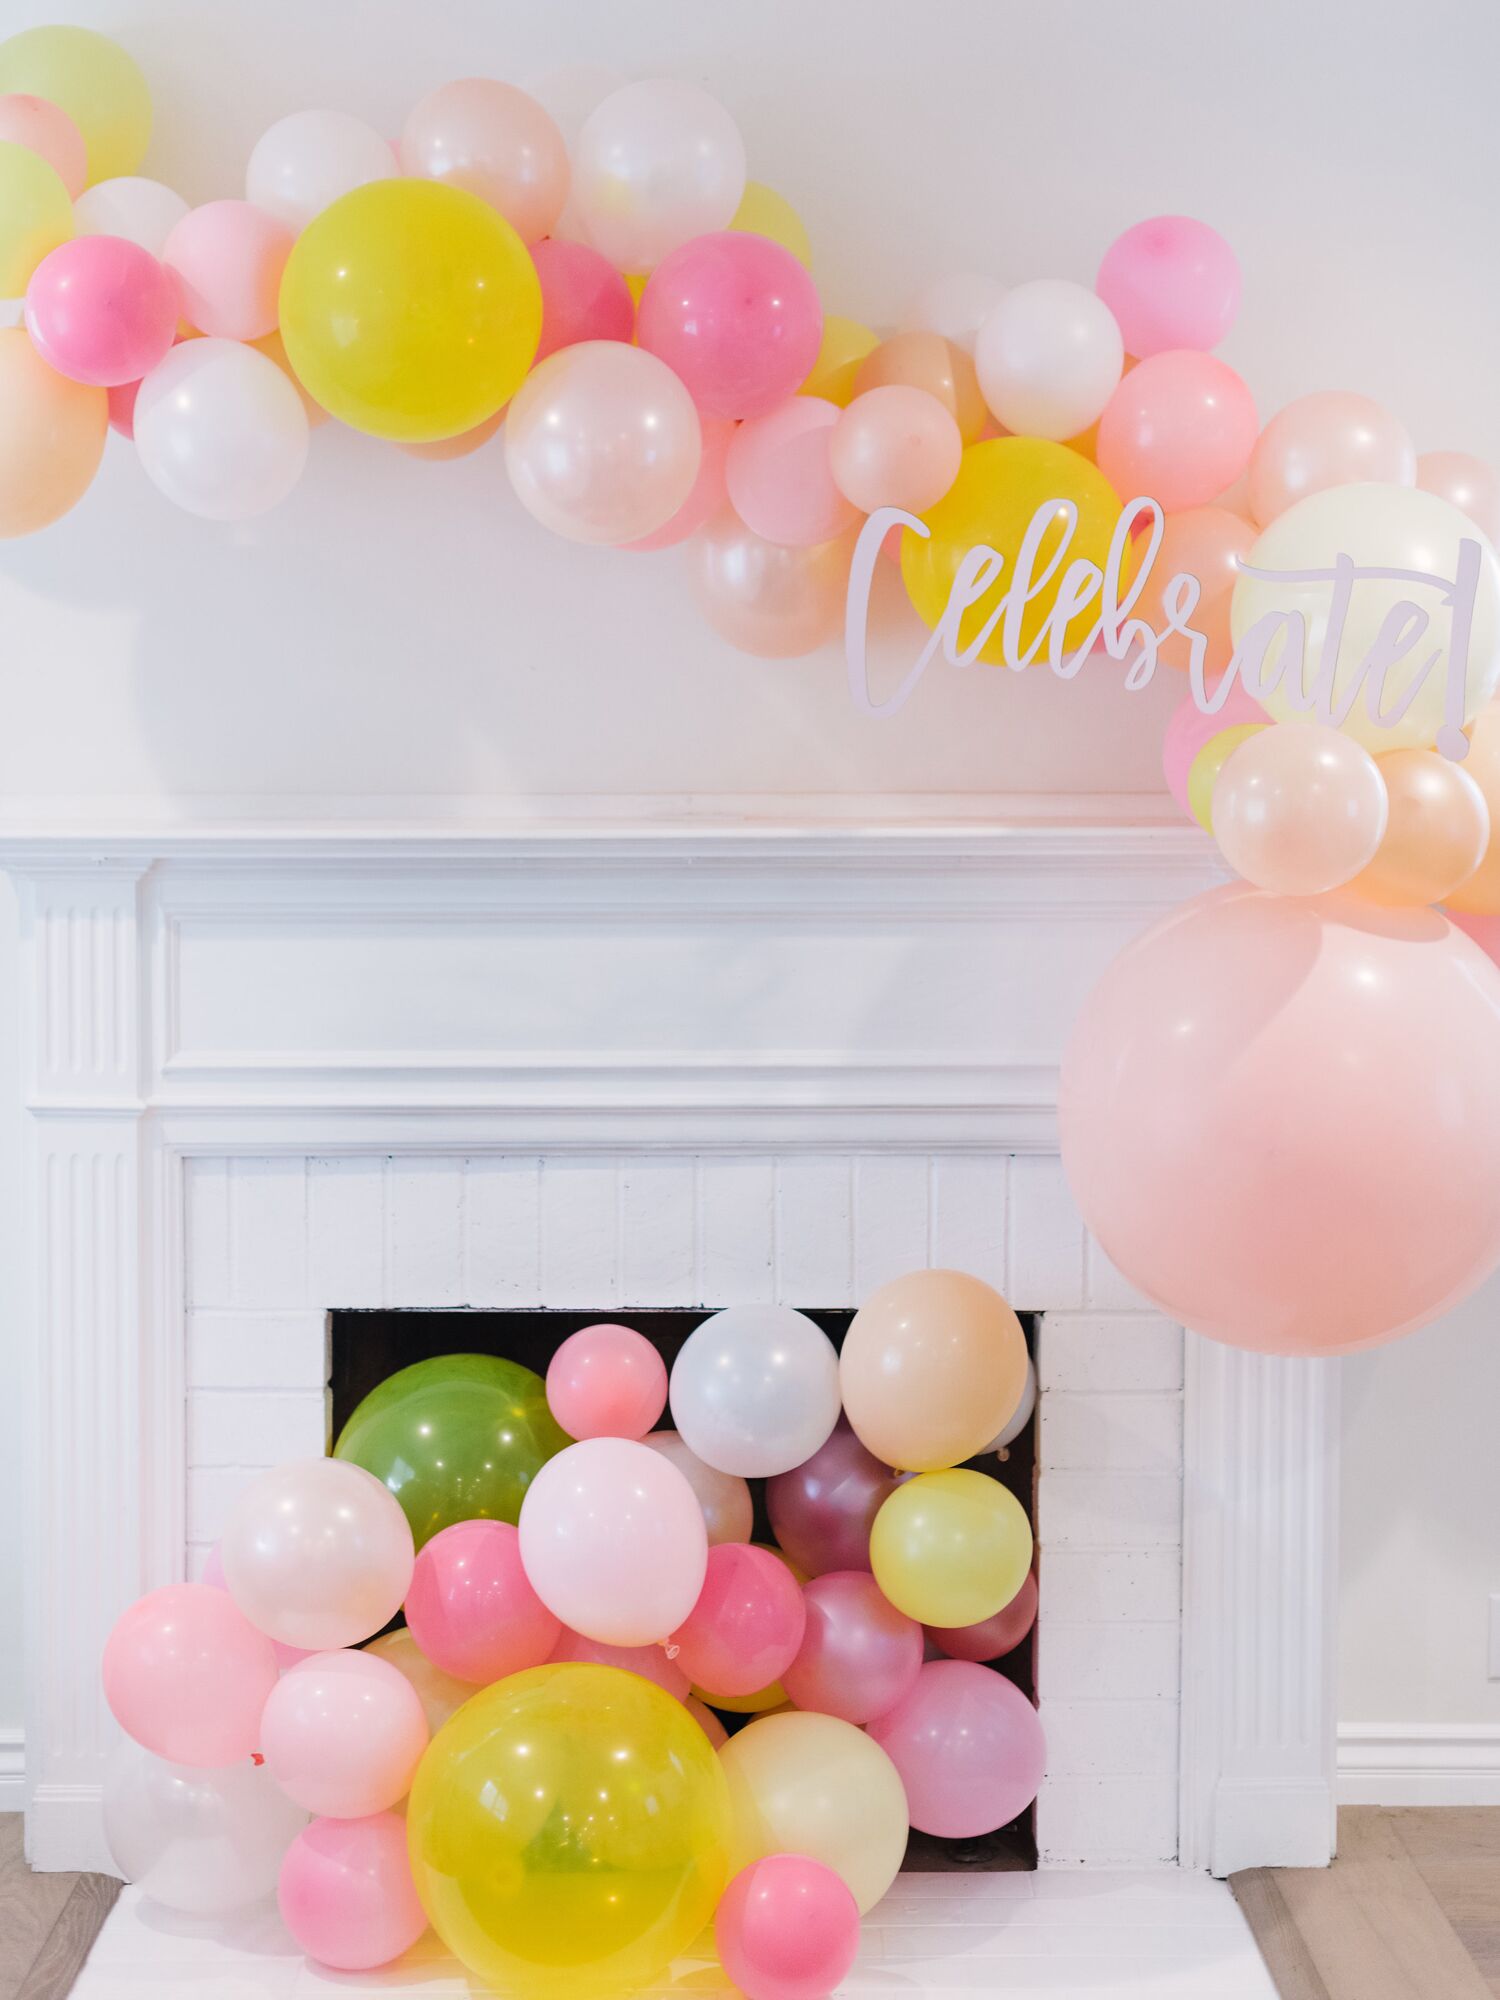 40 Creative Balloon Decoration Ideas for Parties - Hobby Lesson